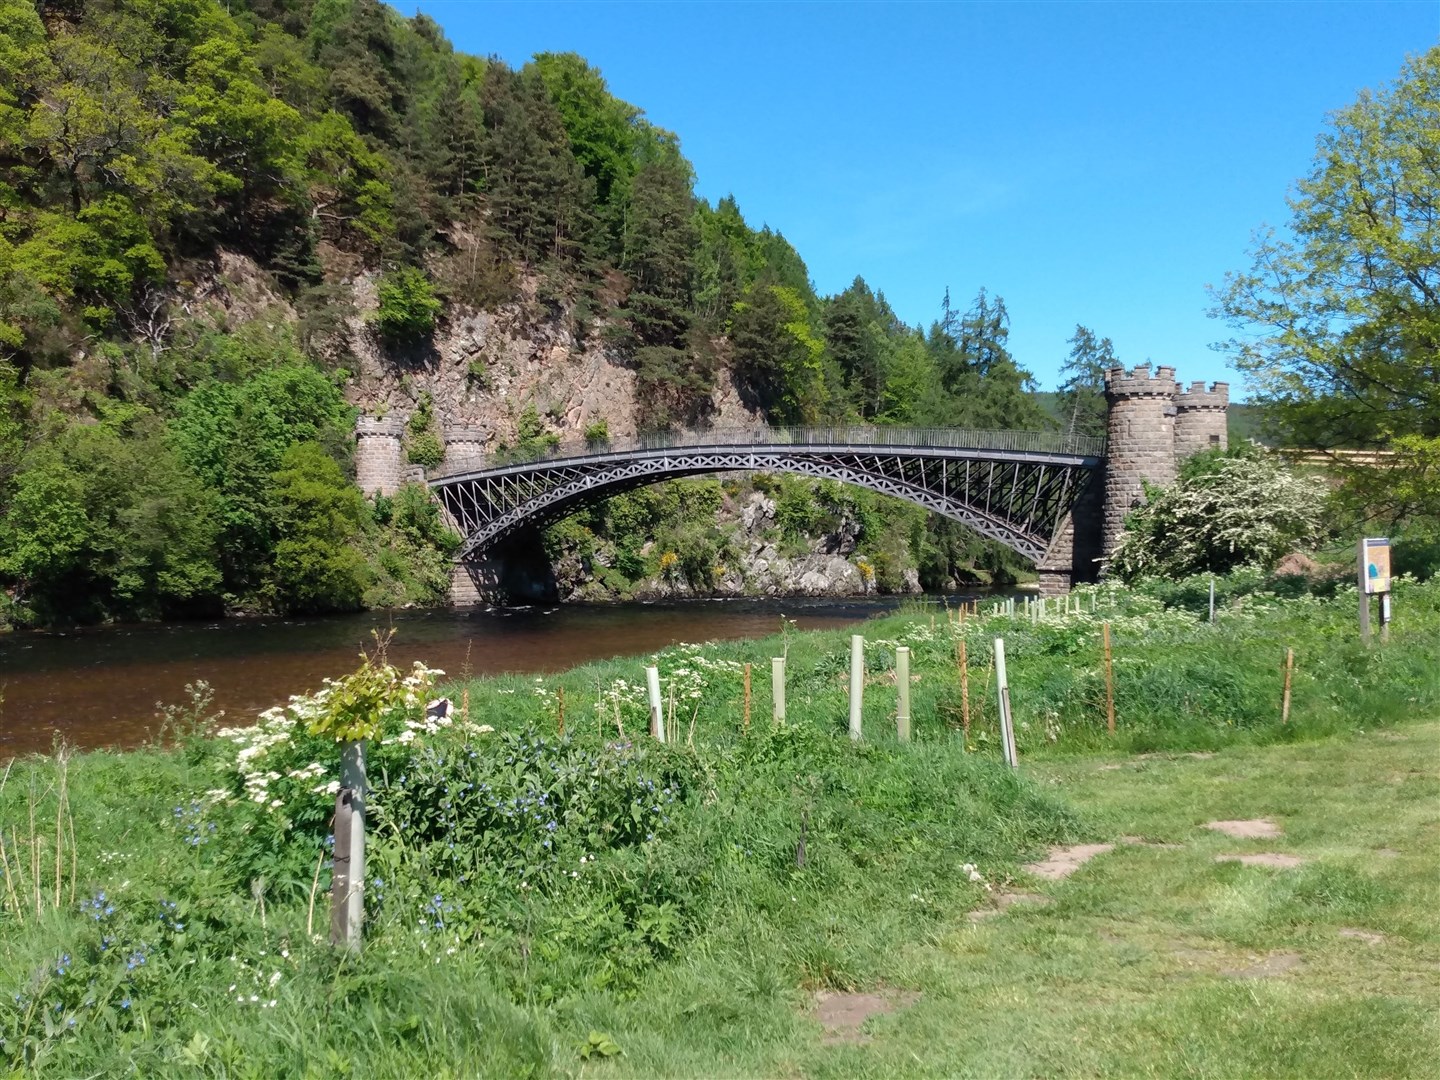 The Telford Bridge over the River Spey at Craigellachie.